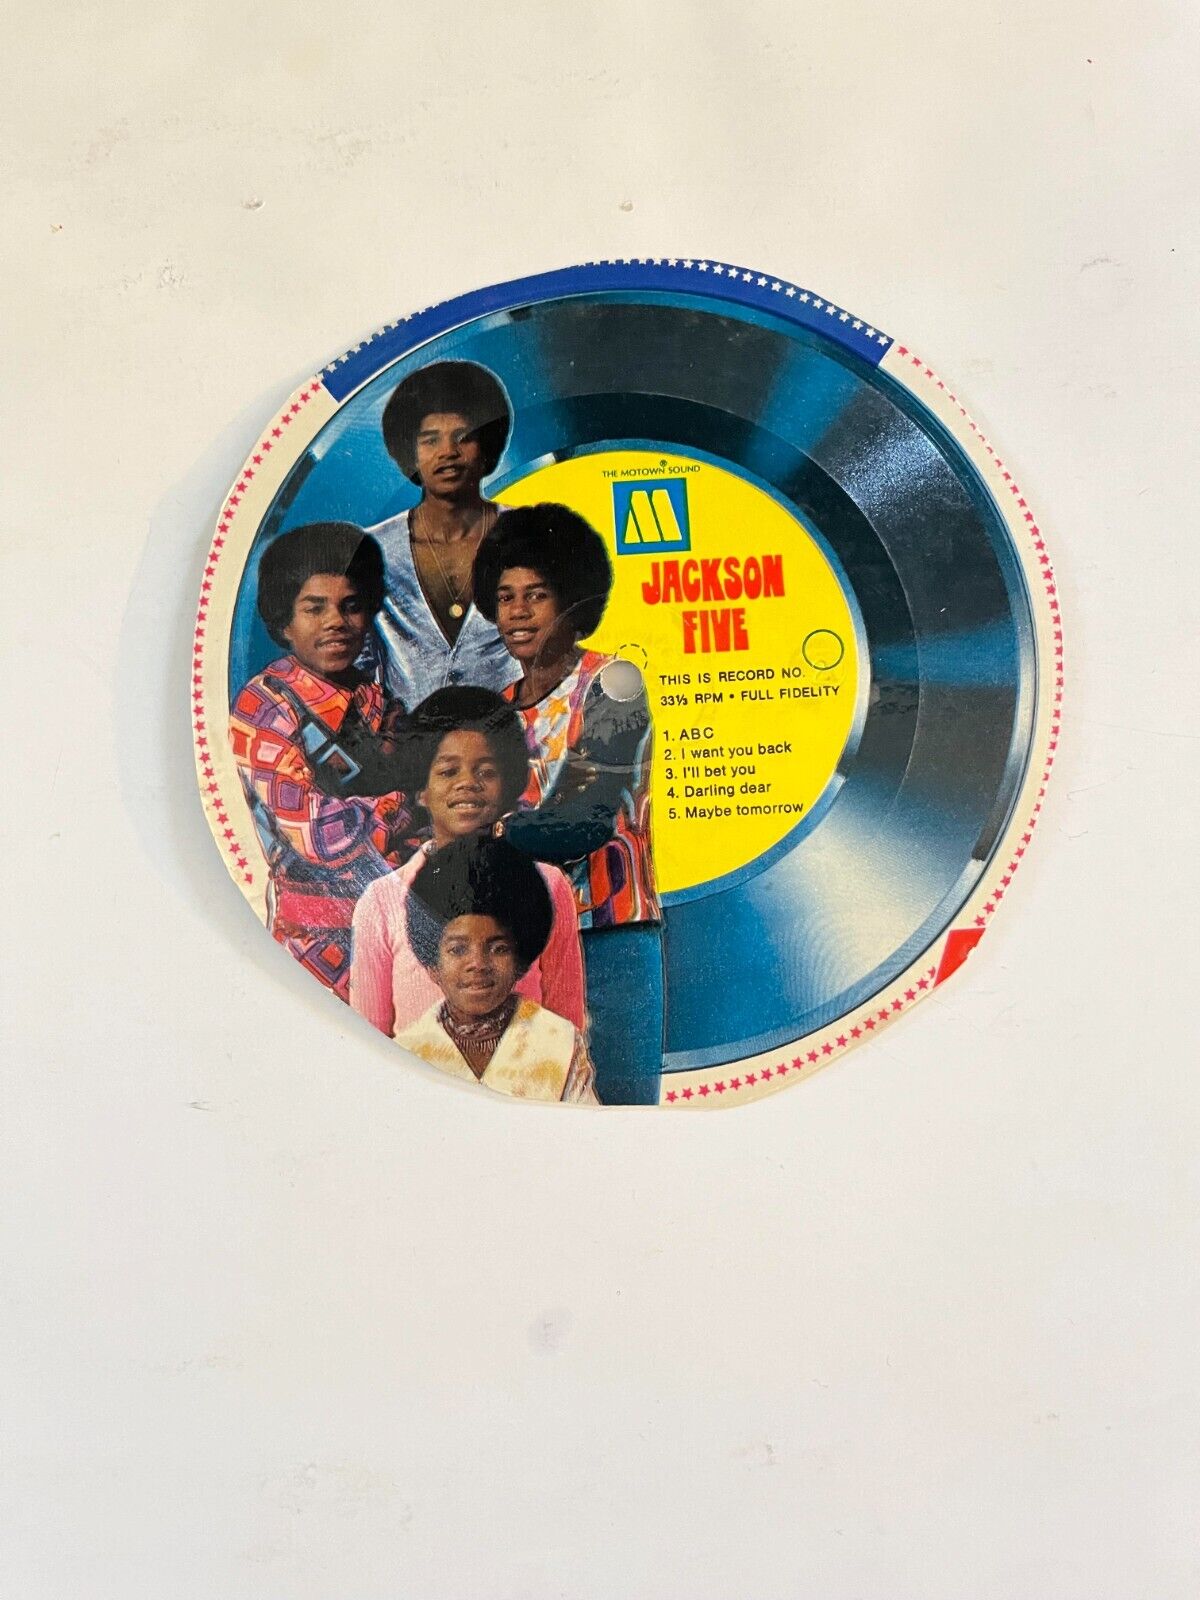 JACKSON FIVE - CEREAL BOX CUT-OUT CARDBOARD RECORD 33 RPM 5 SONGS ,  VG + RARE 